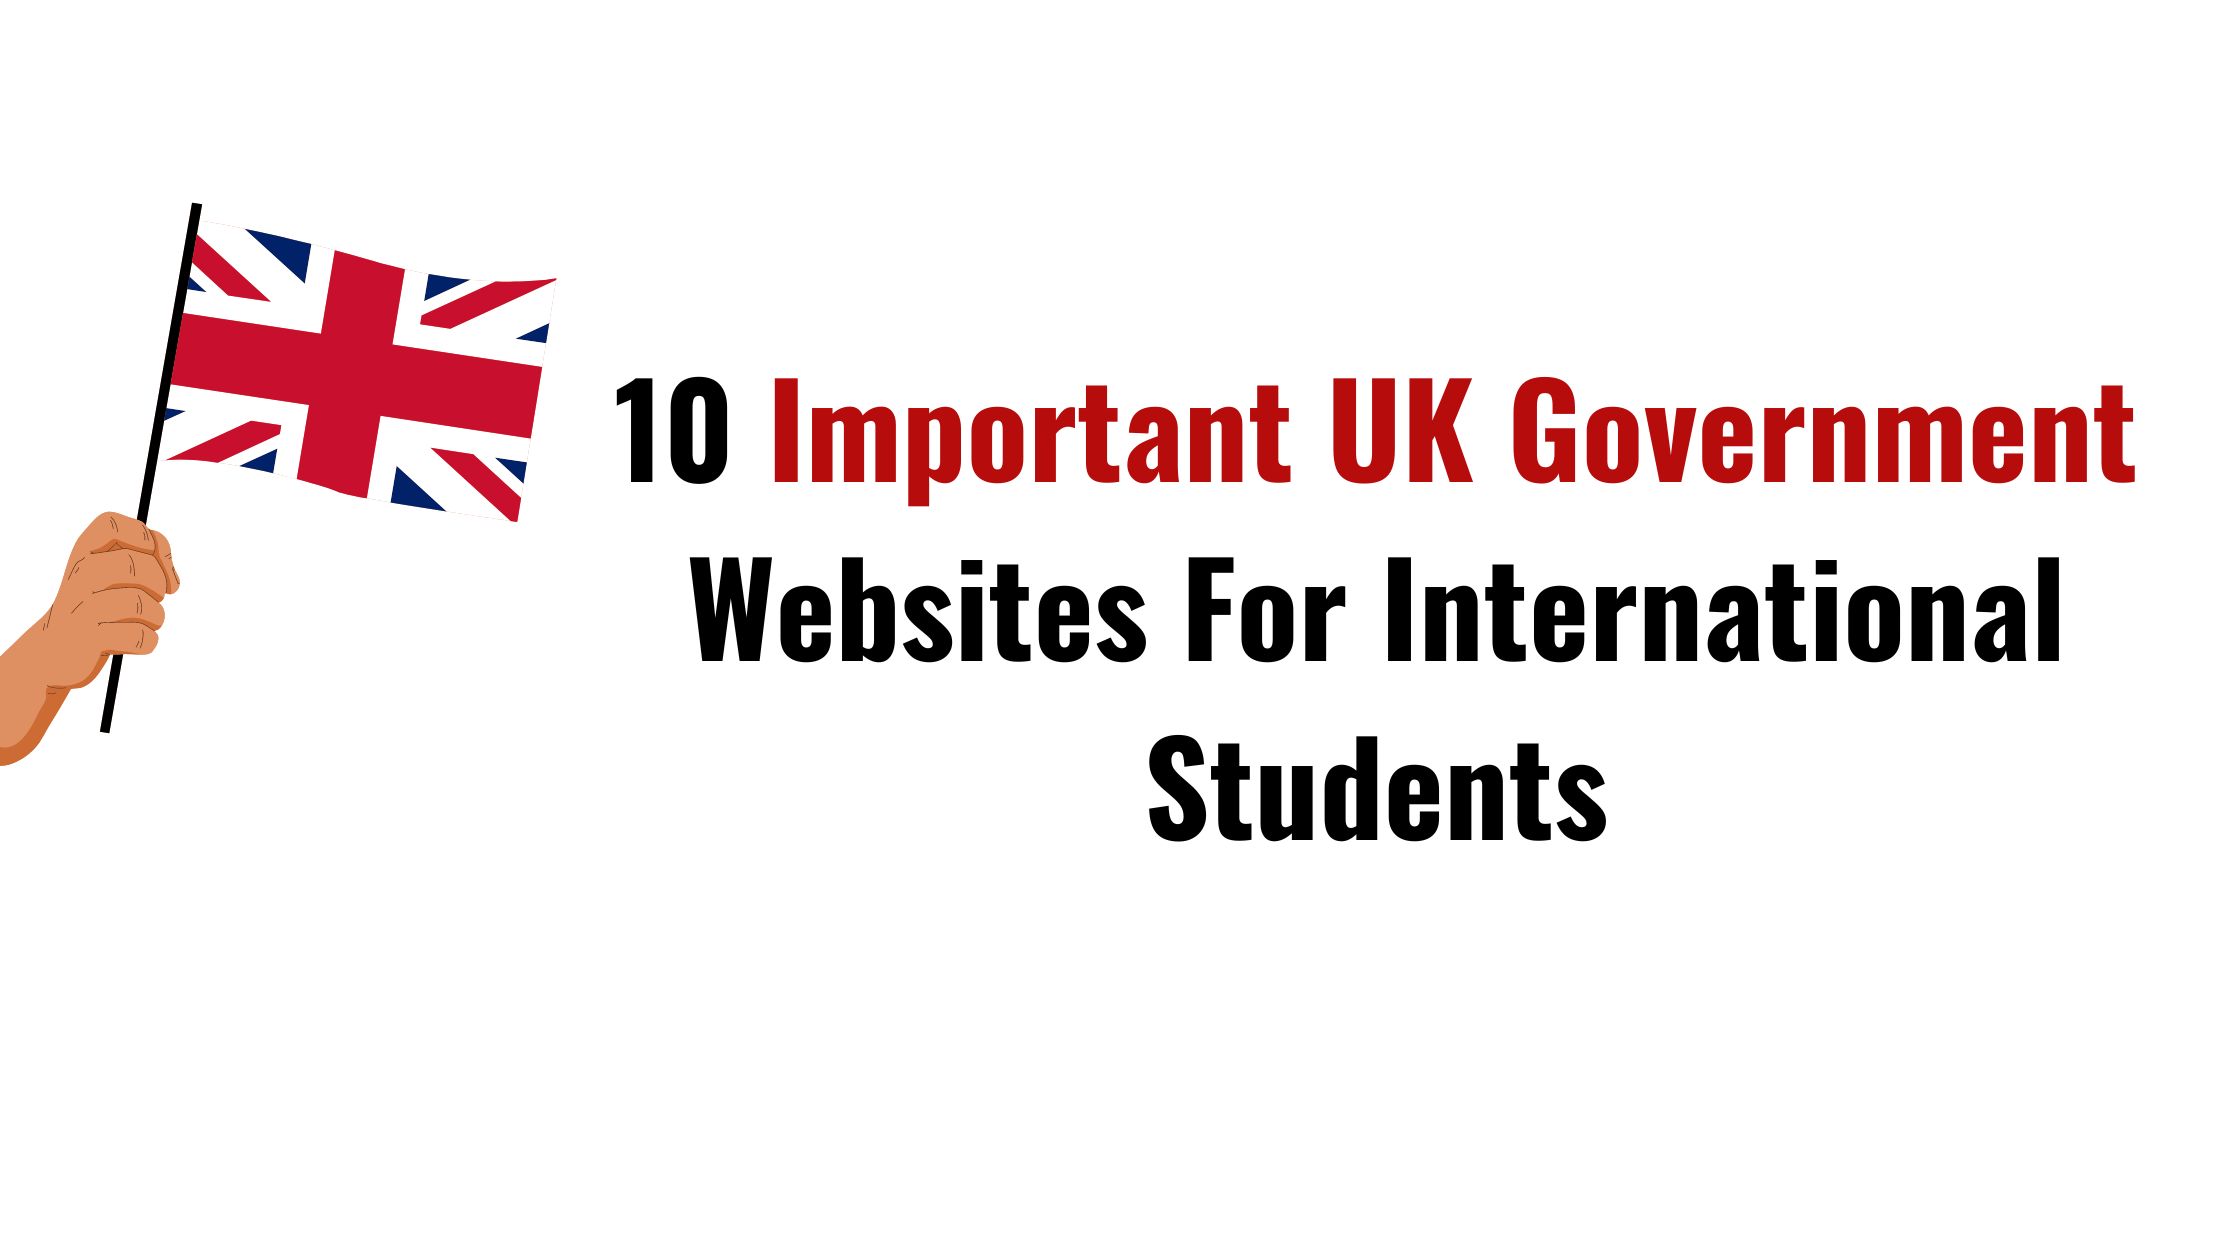 10 Important UK Government Websites For International Students